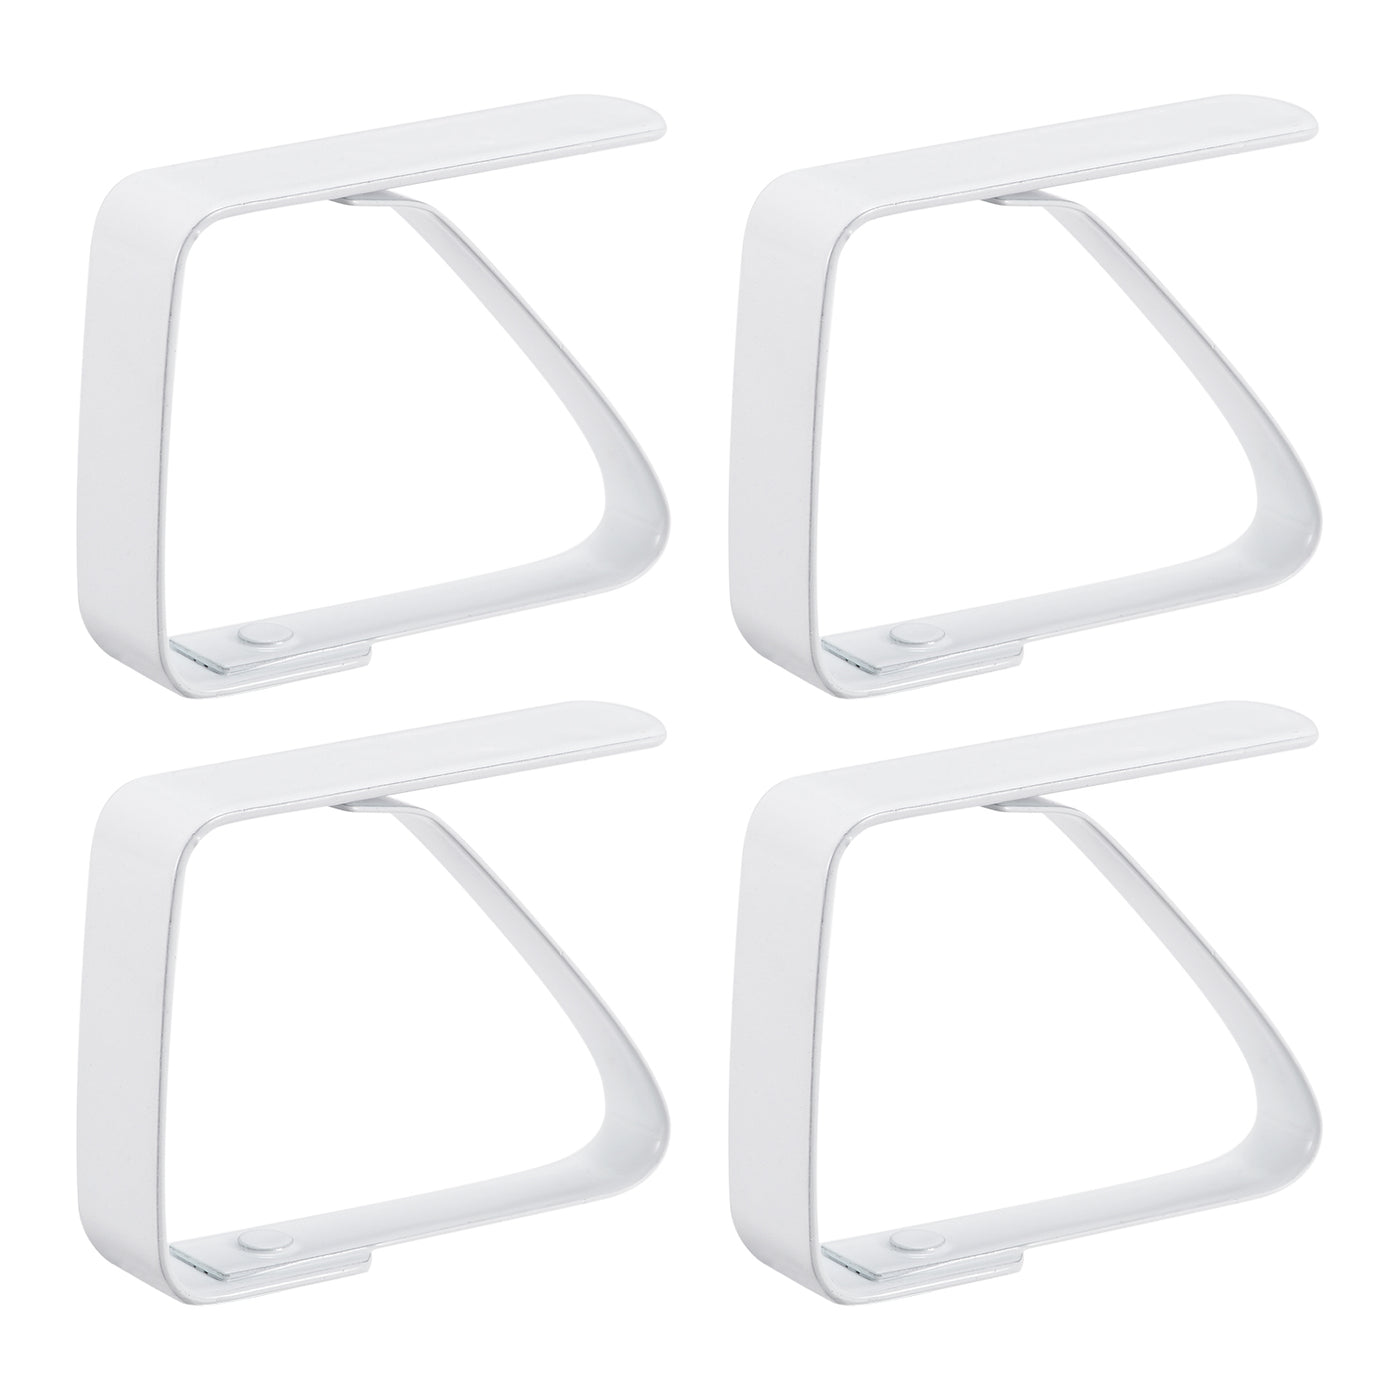 uxcell Uxcell Tablecloth Clips 50mm x 40mm 420 Stainless Steel Table Cloth Holder White 12 Pcs